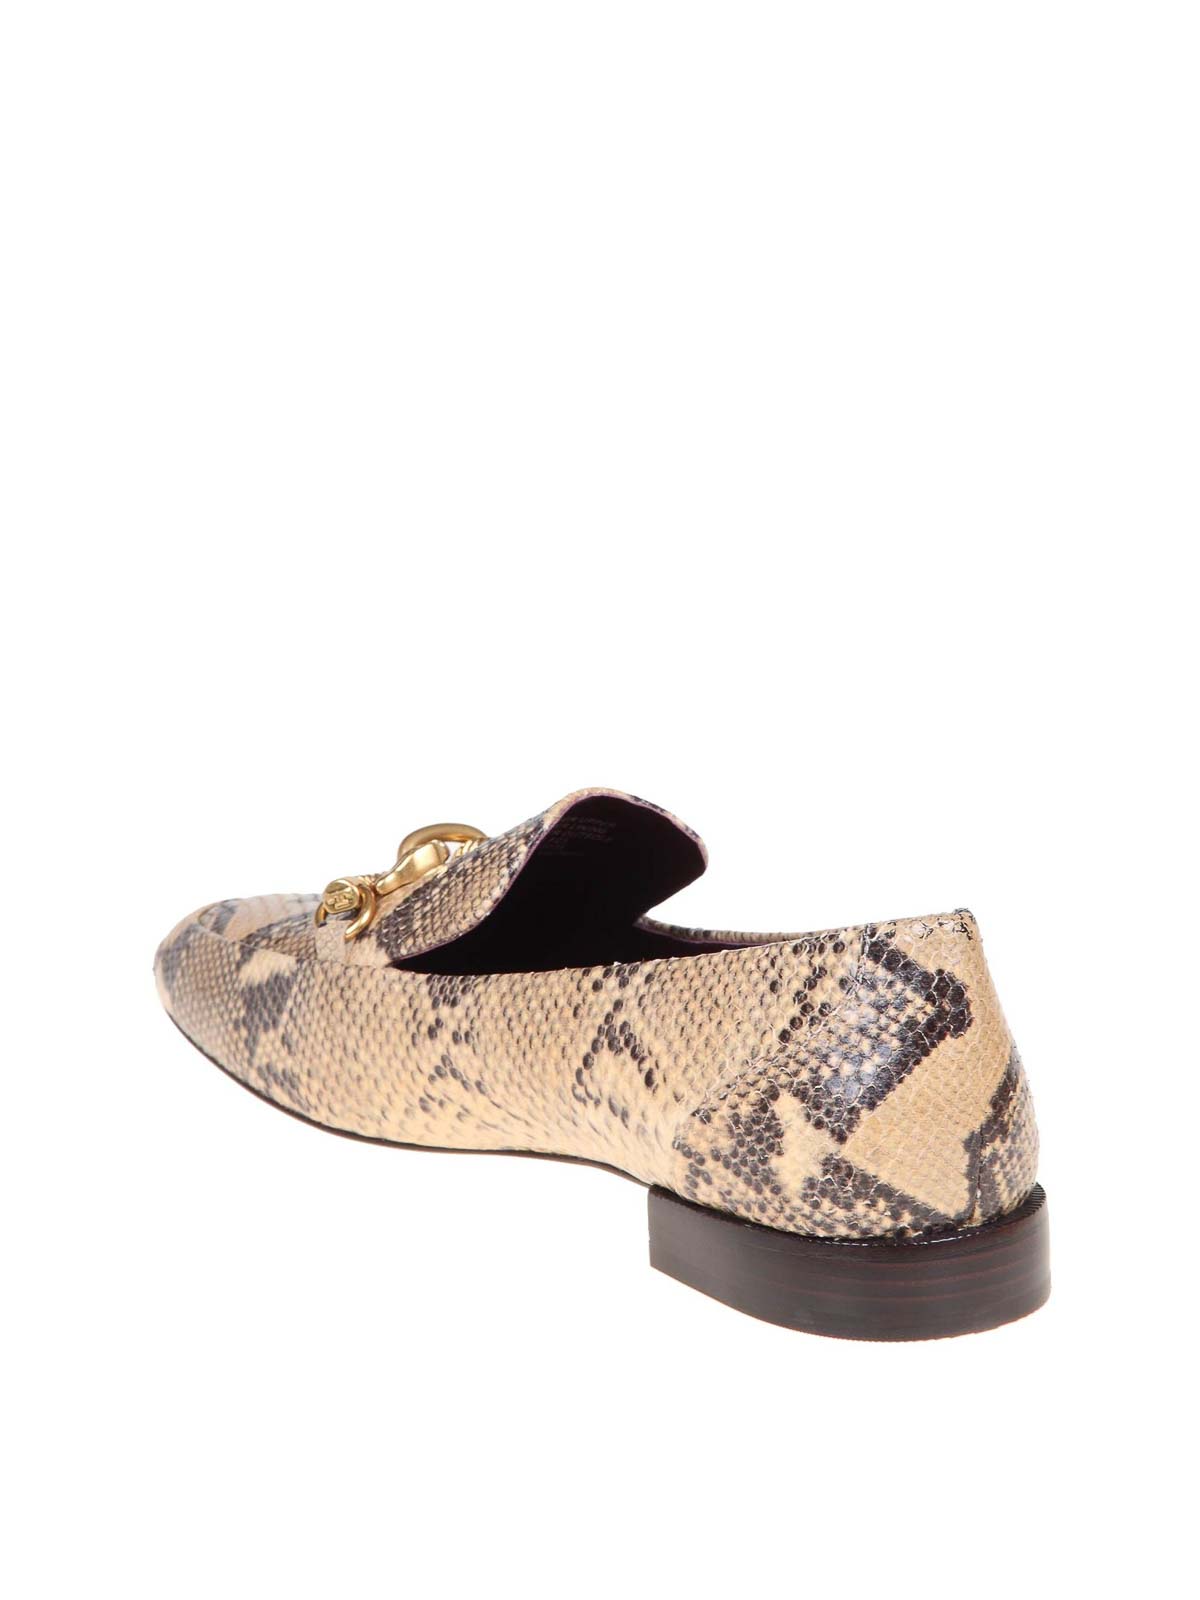 Shop Tory Burch Python Print Leather Loafers In Dark Beige